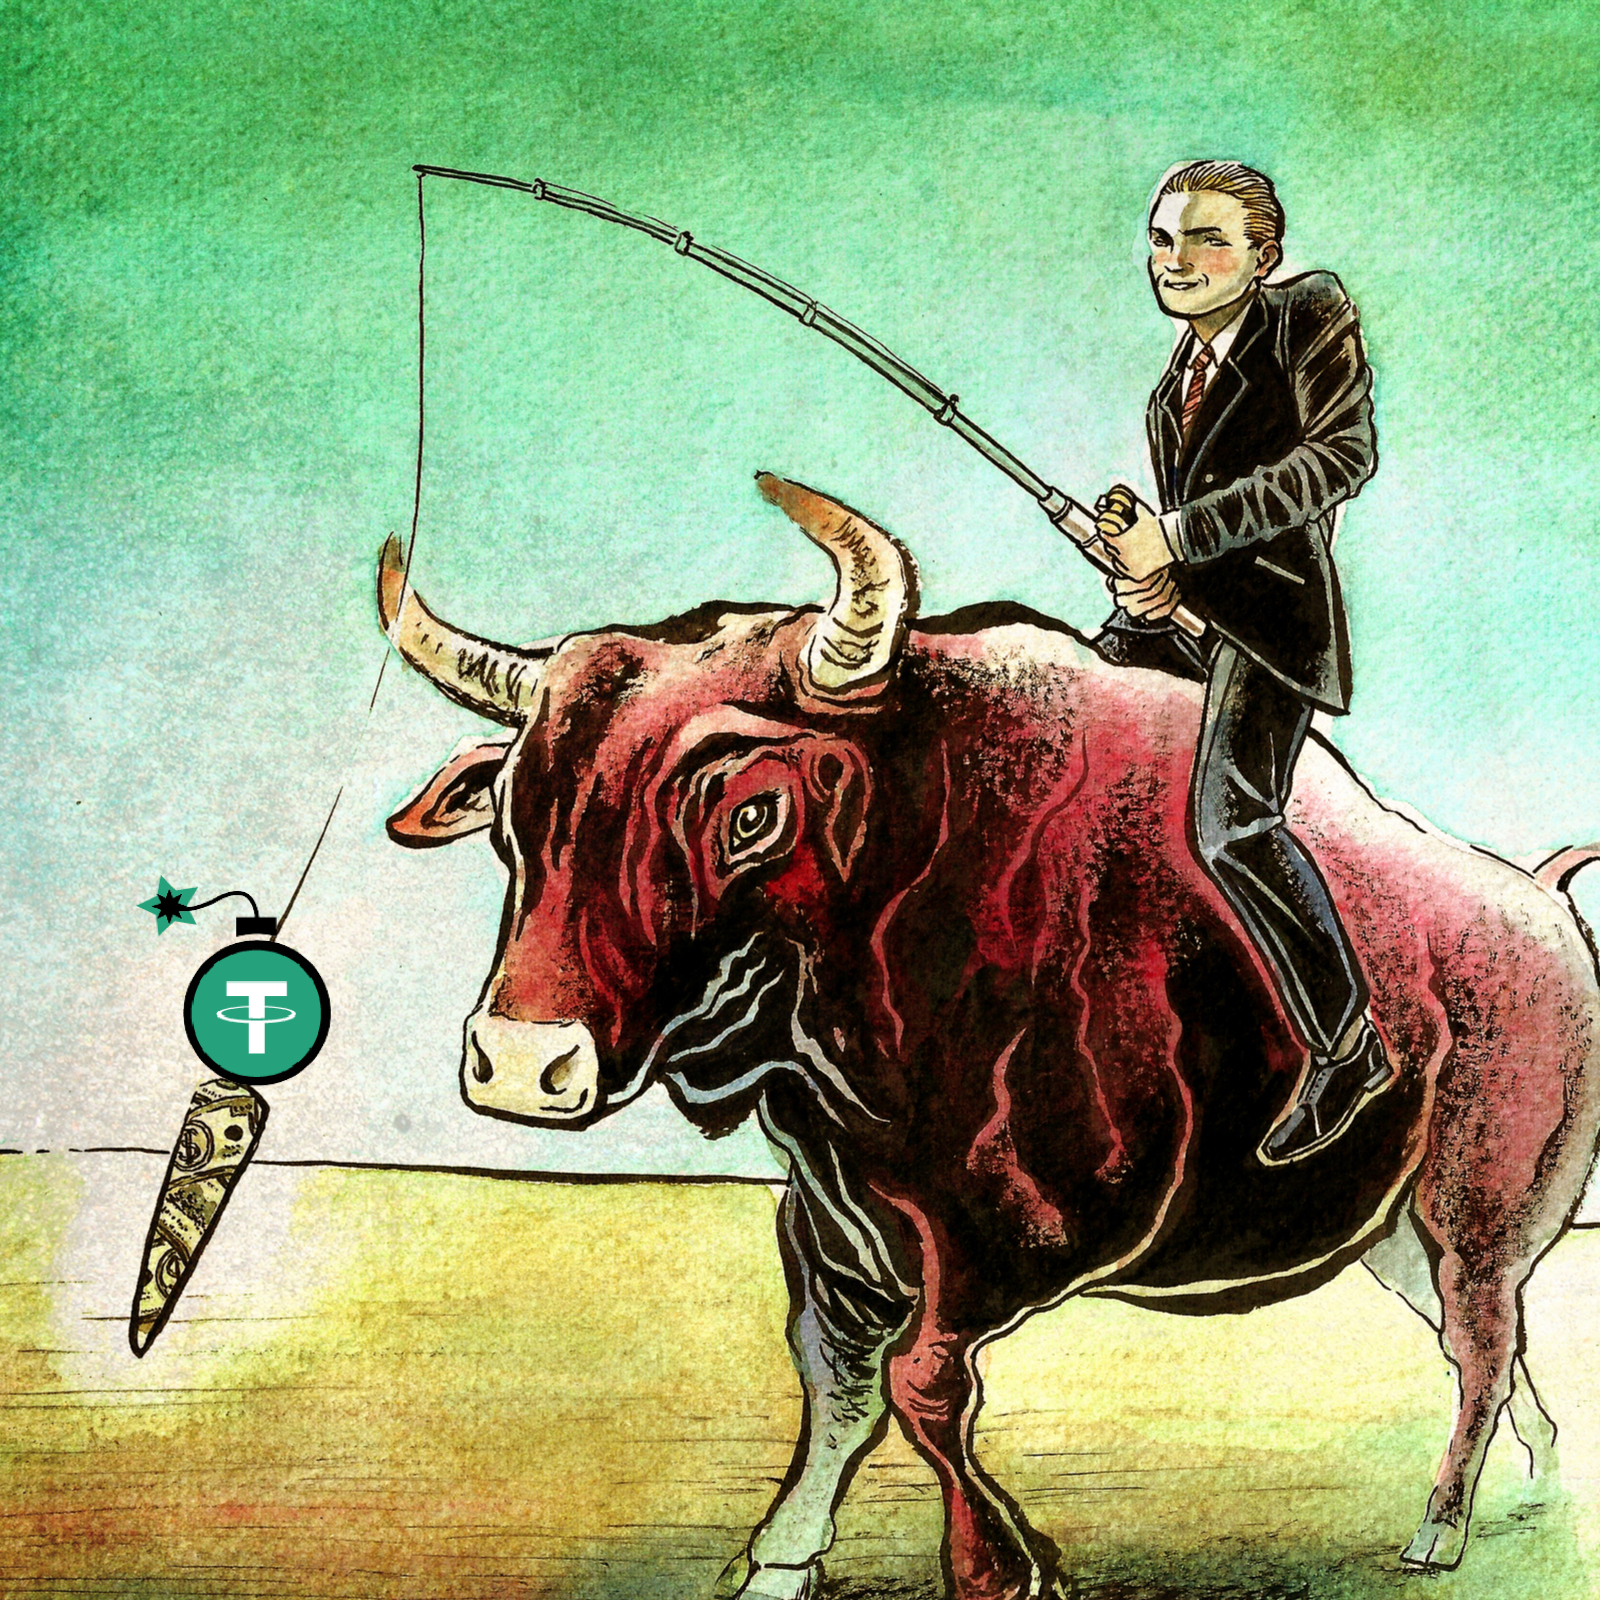 New Report Blames Tether for Bitcoin’s Bull Run